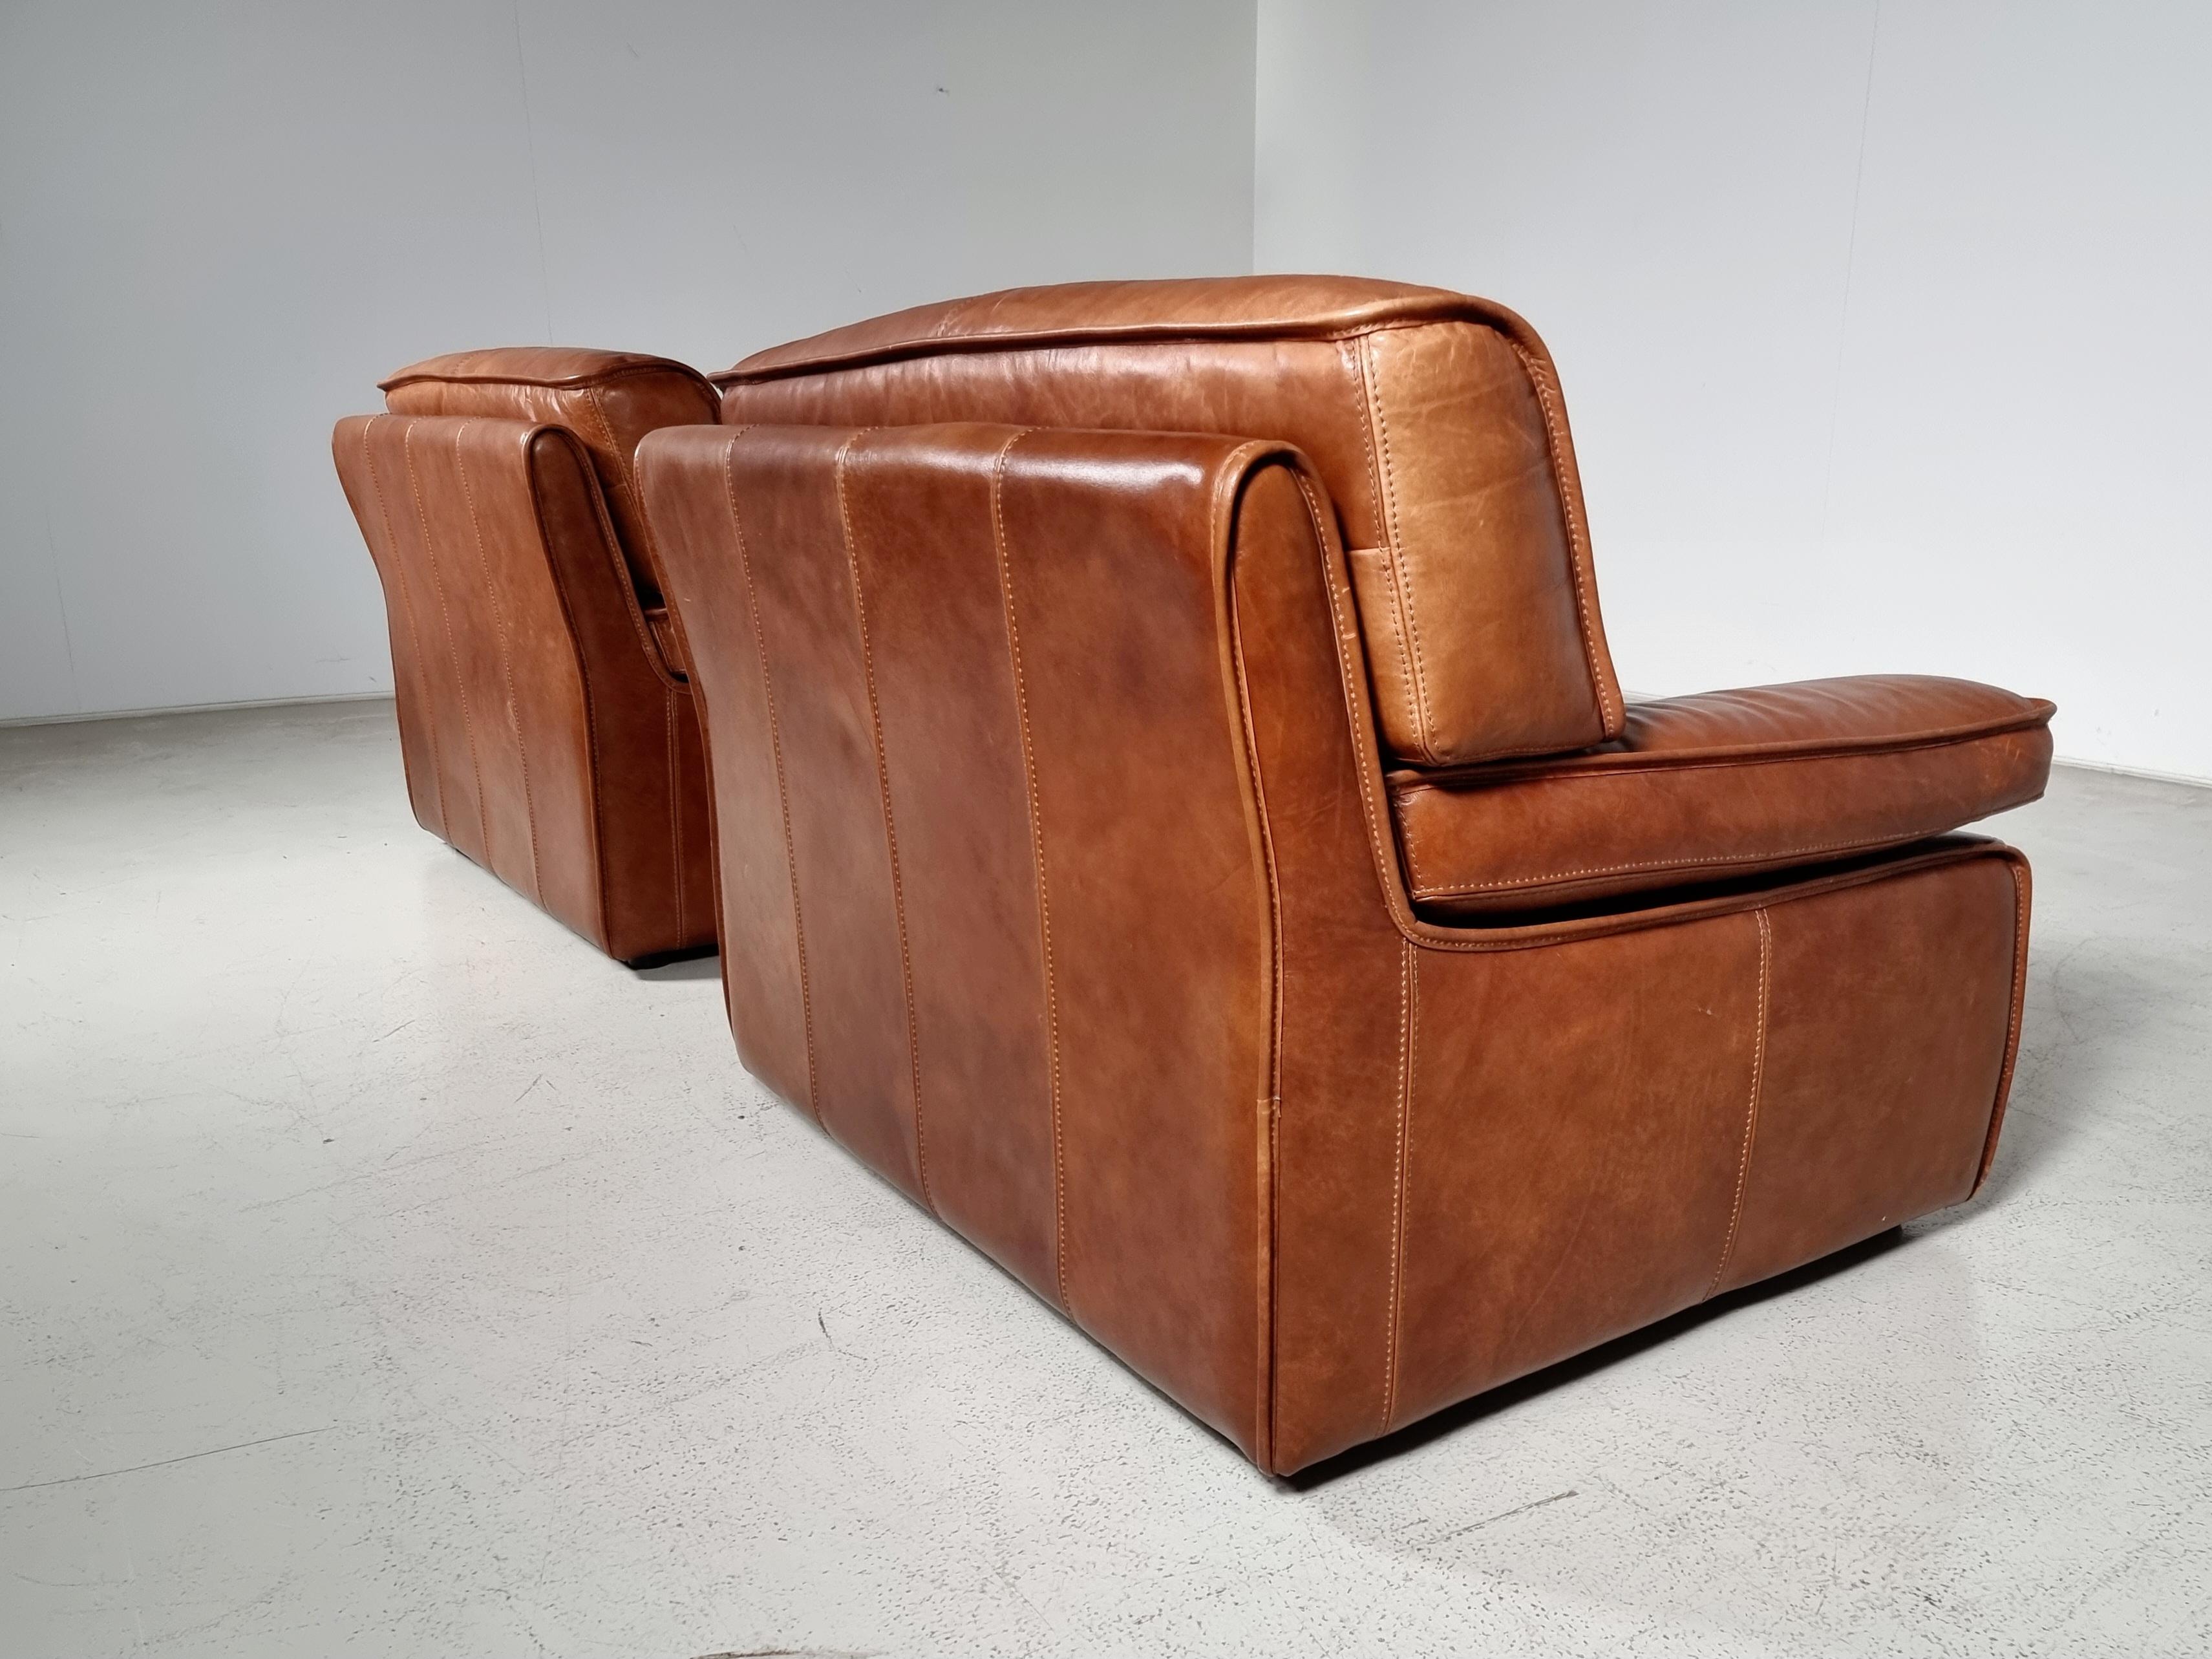 Pair of Huge Italian Lounge Chairs in Cognac Buffalo Leather, 1970s For Sale 3